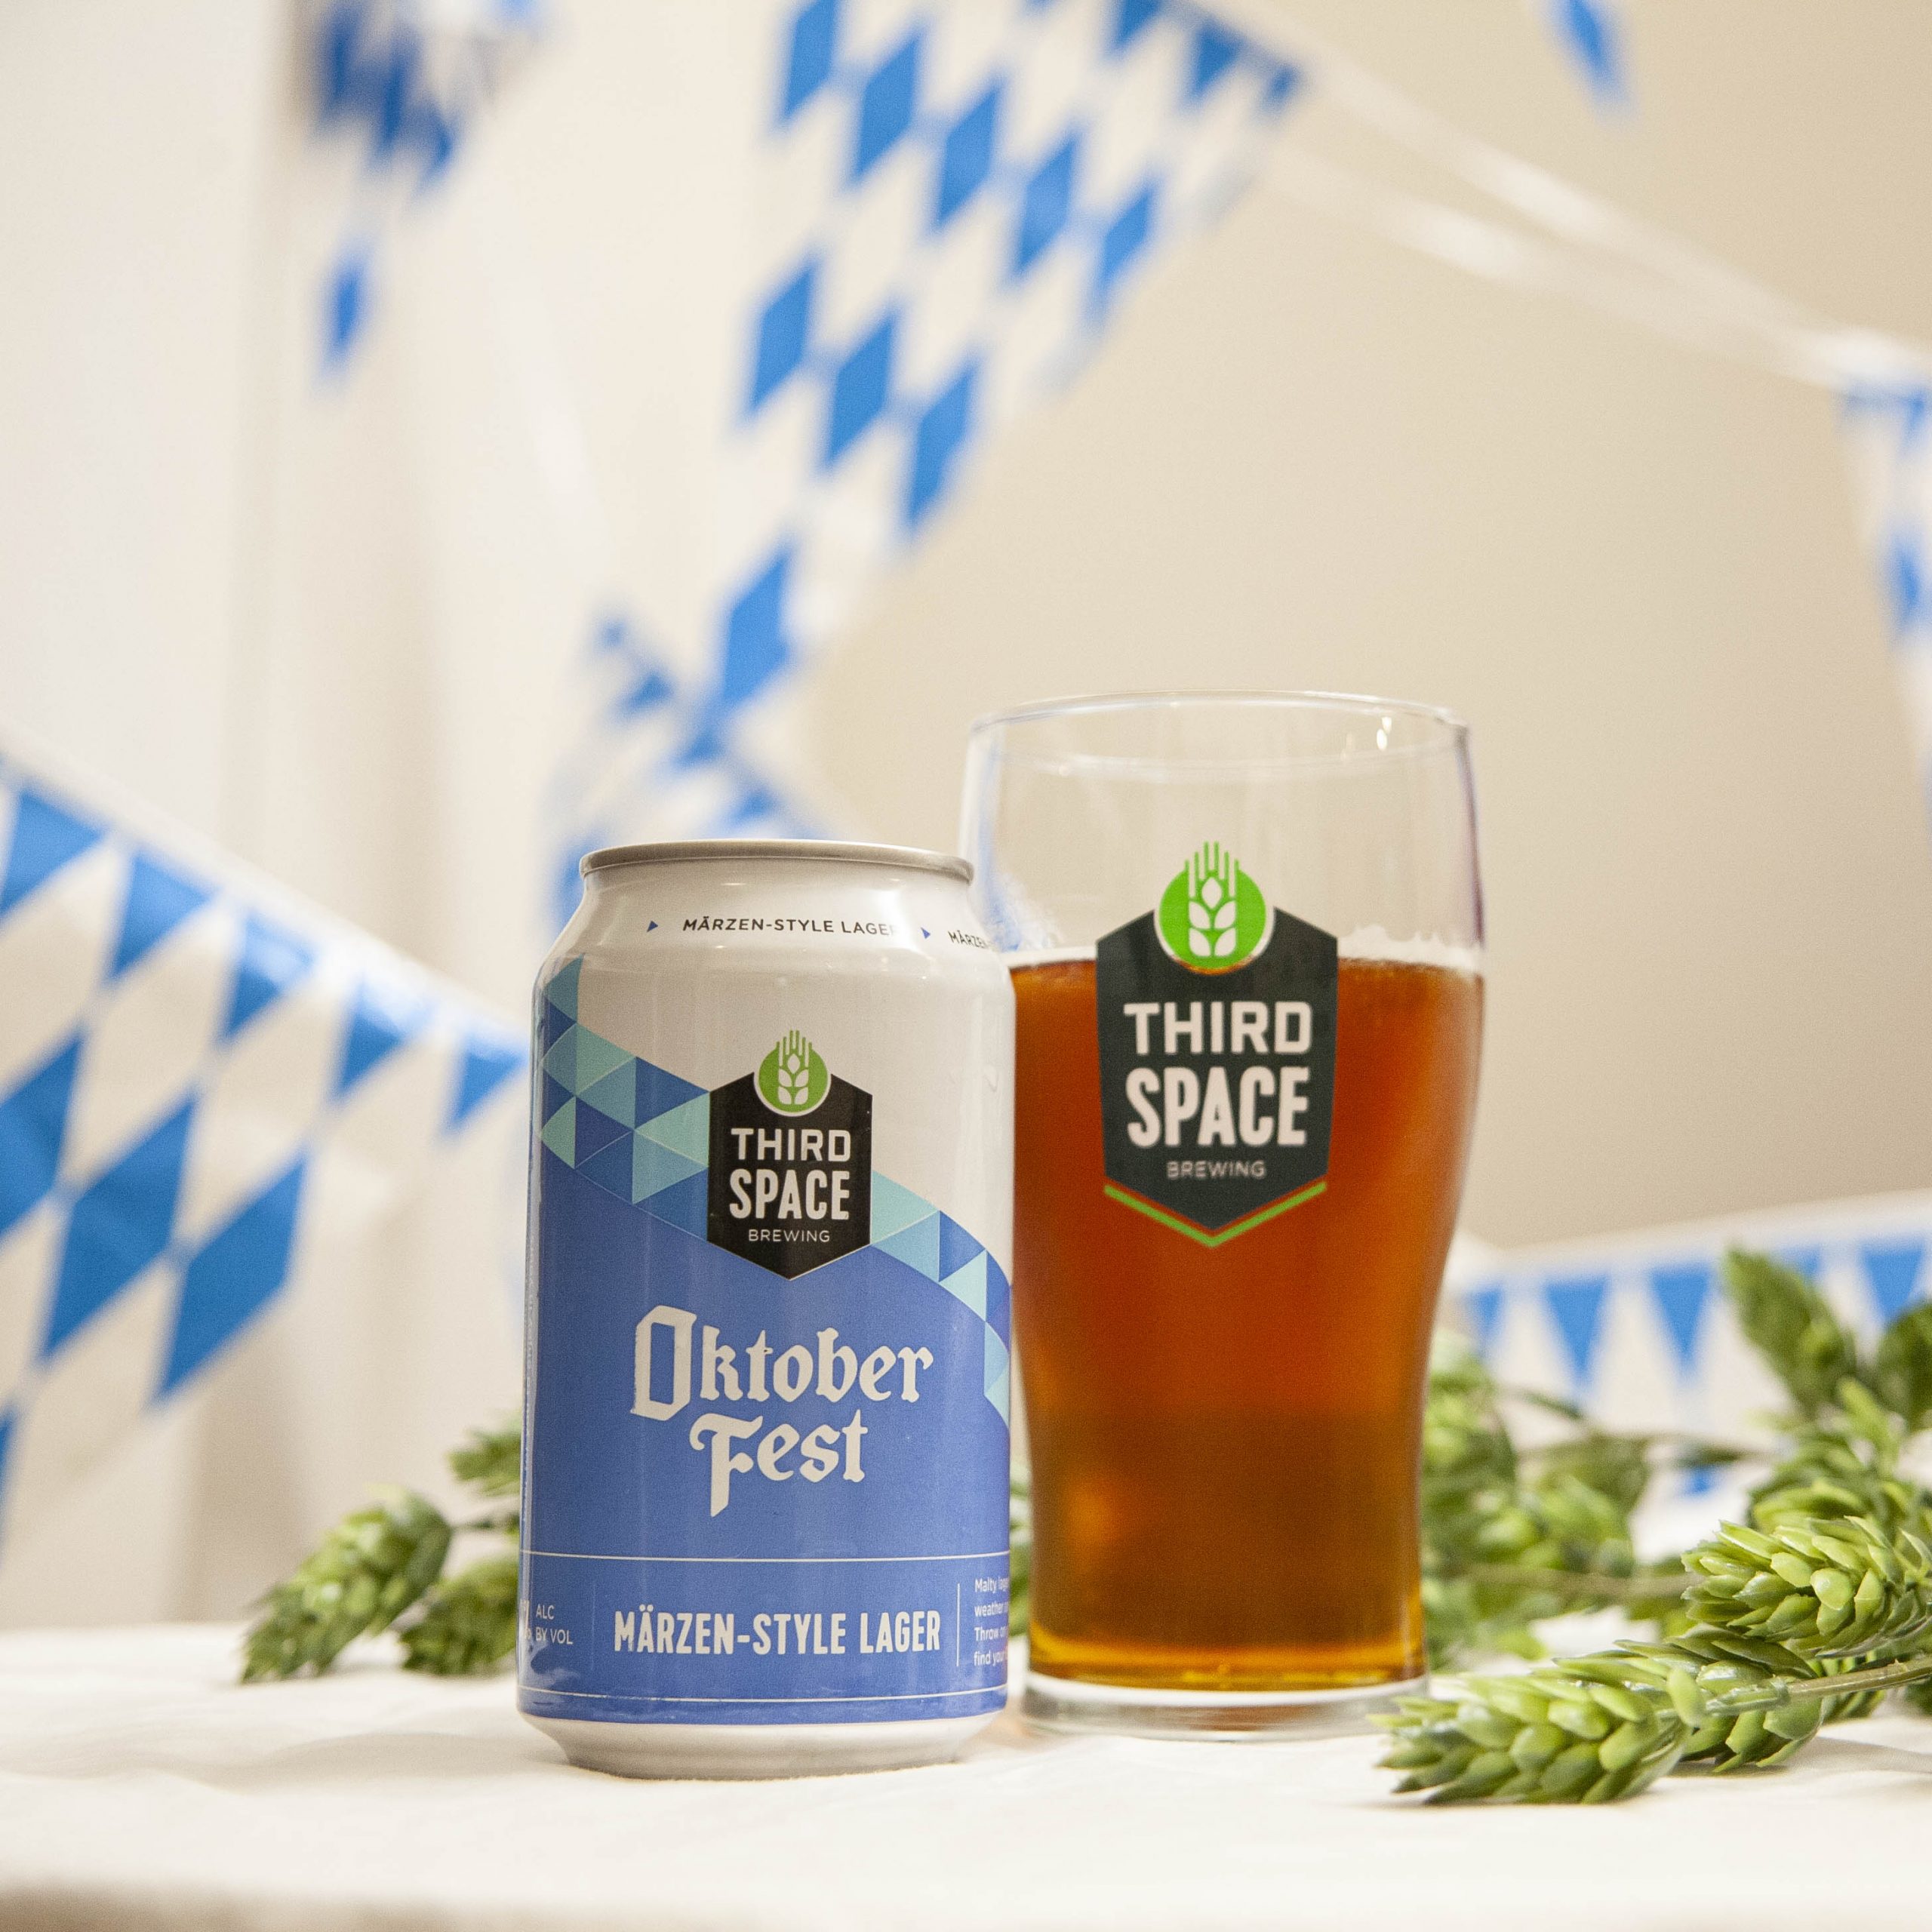 Third Space's Oktoberfest is poured into a branded glass, amidst hop cones and blue and white bunting. 